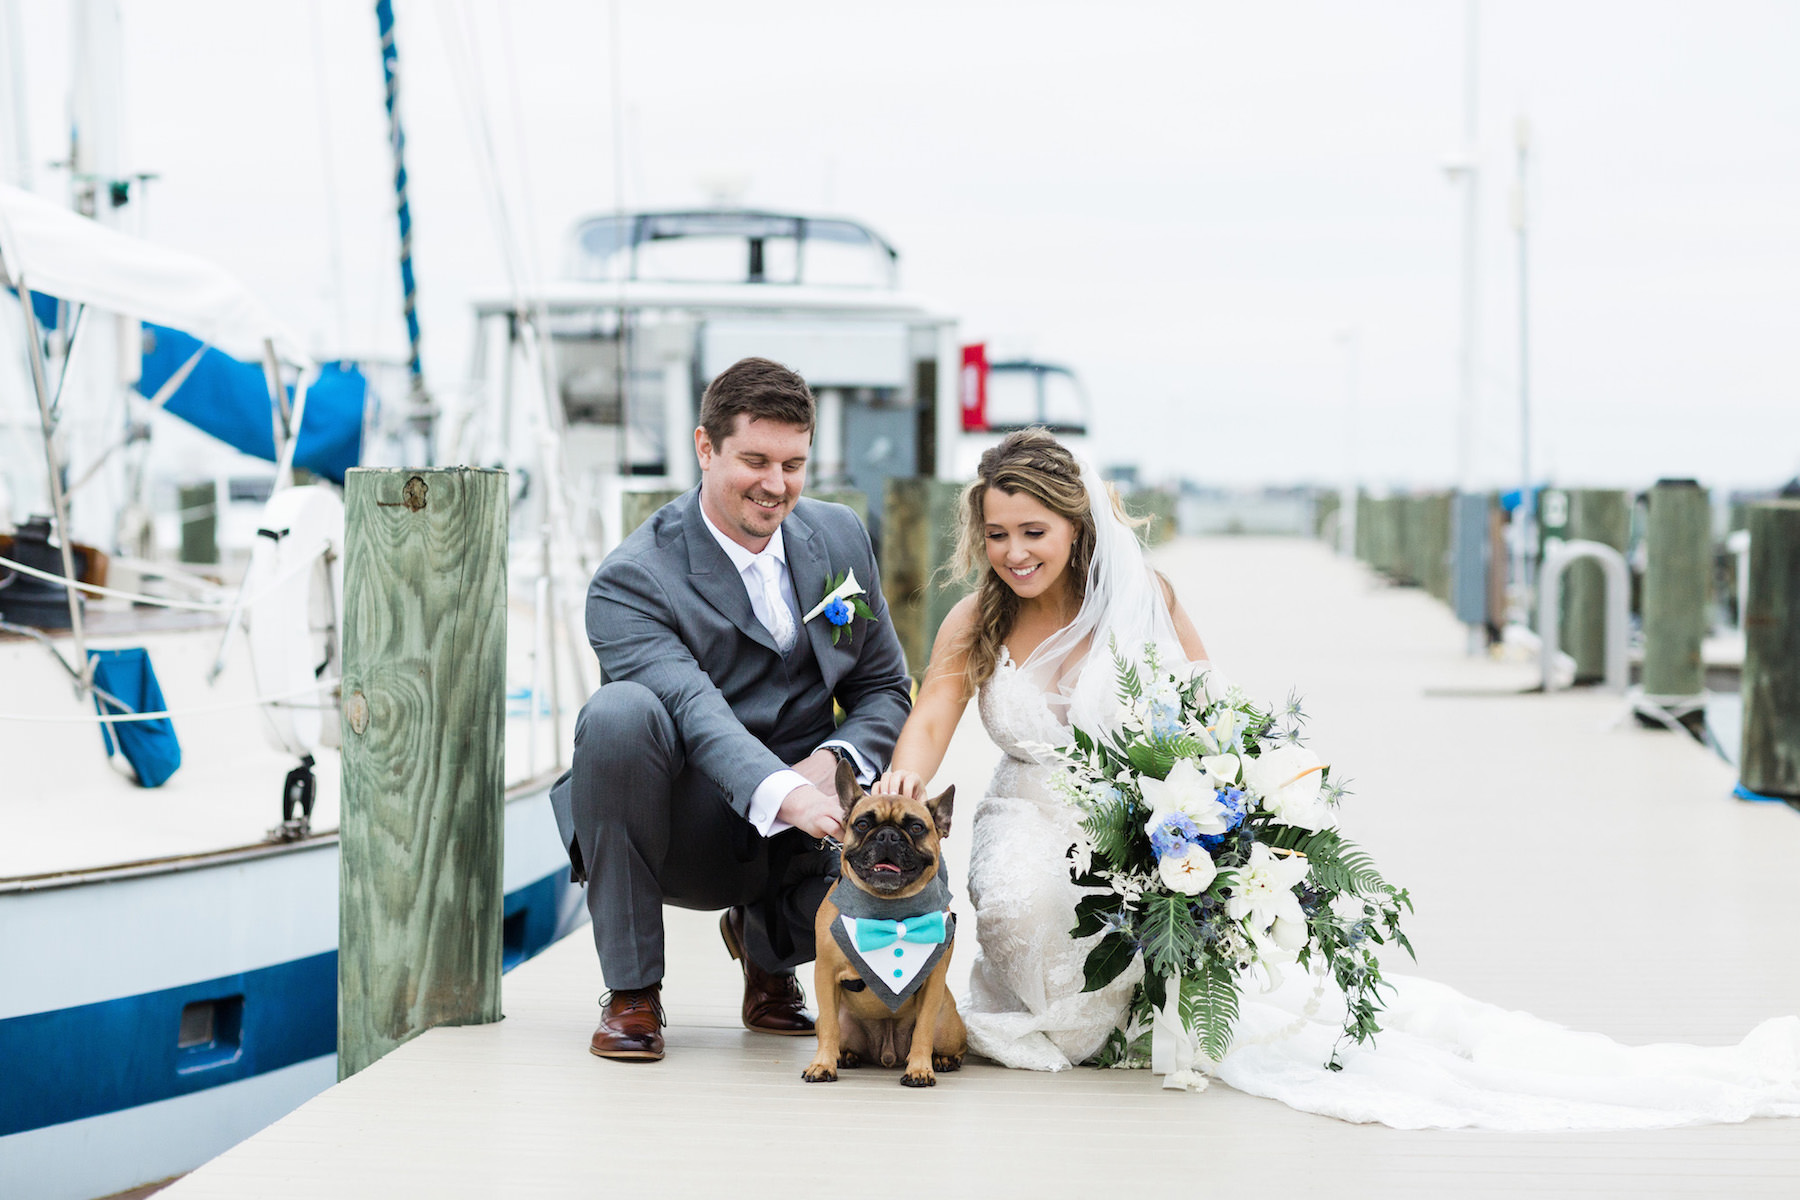 Bride and Groom Portraits at Marina Dock by Boats | St. Pete Wedding Venue Isla Del Sol | Bride and Groom Photos with Pet Dog of Honor | St. Petersburg Pet Planner Fairytail Pet Care